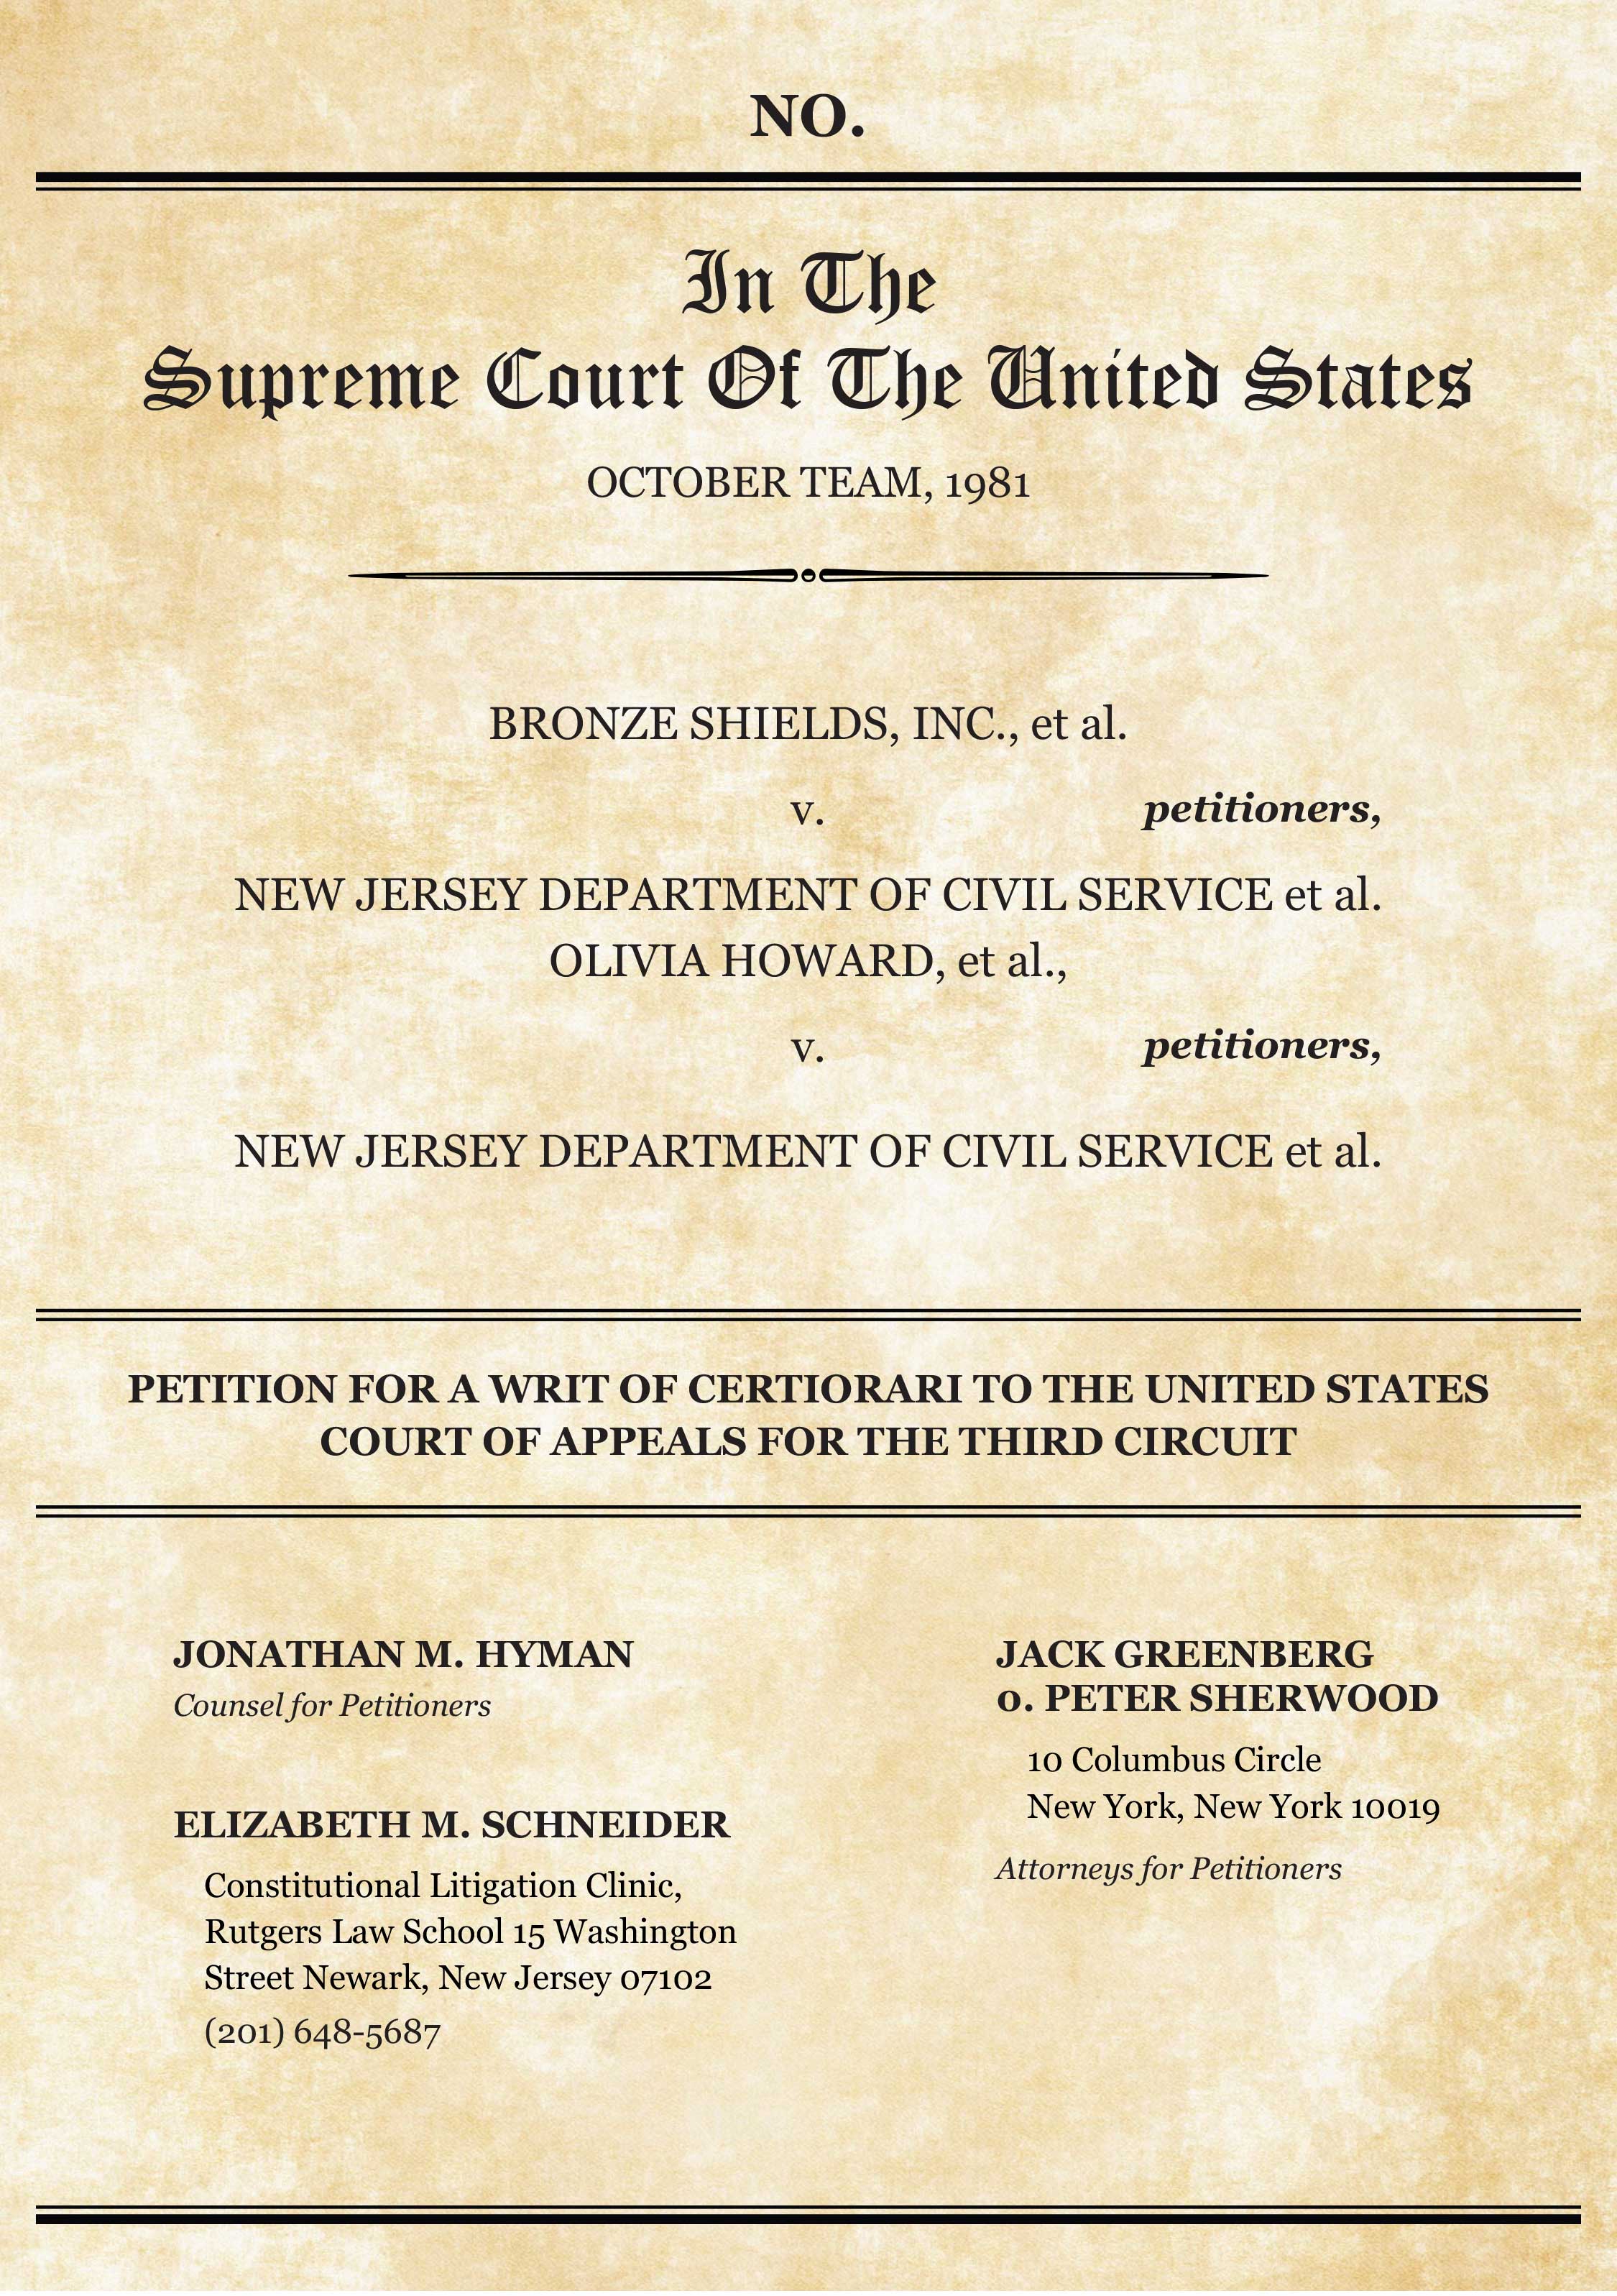 Newark Bronze Shields, Inc., petitioned for a Writ of Certiorari to the United States Court of Appeals